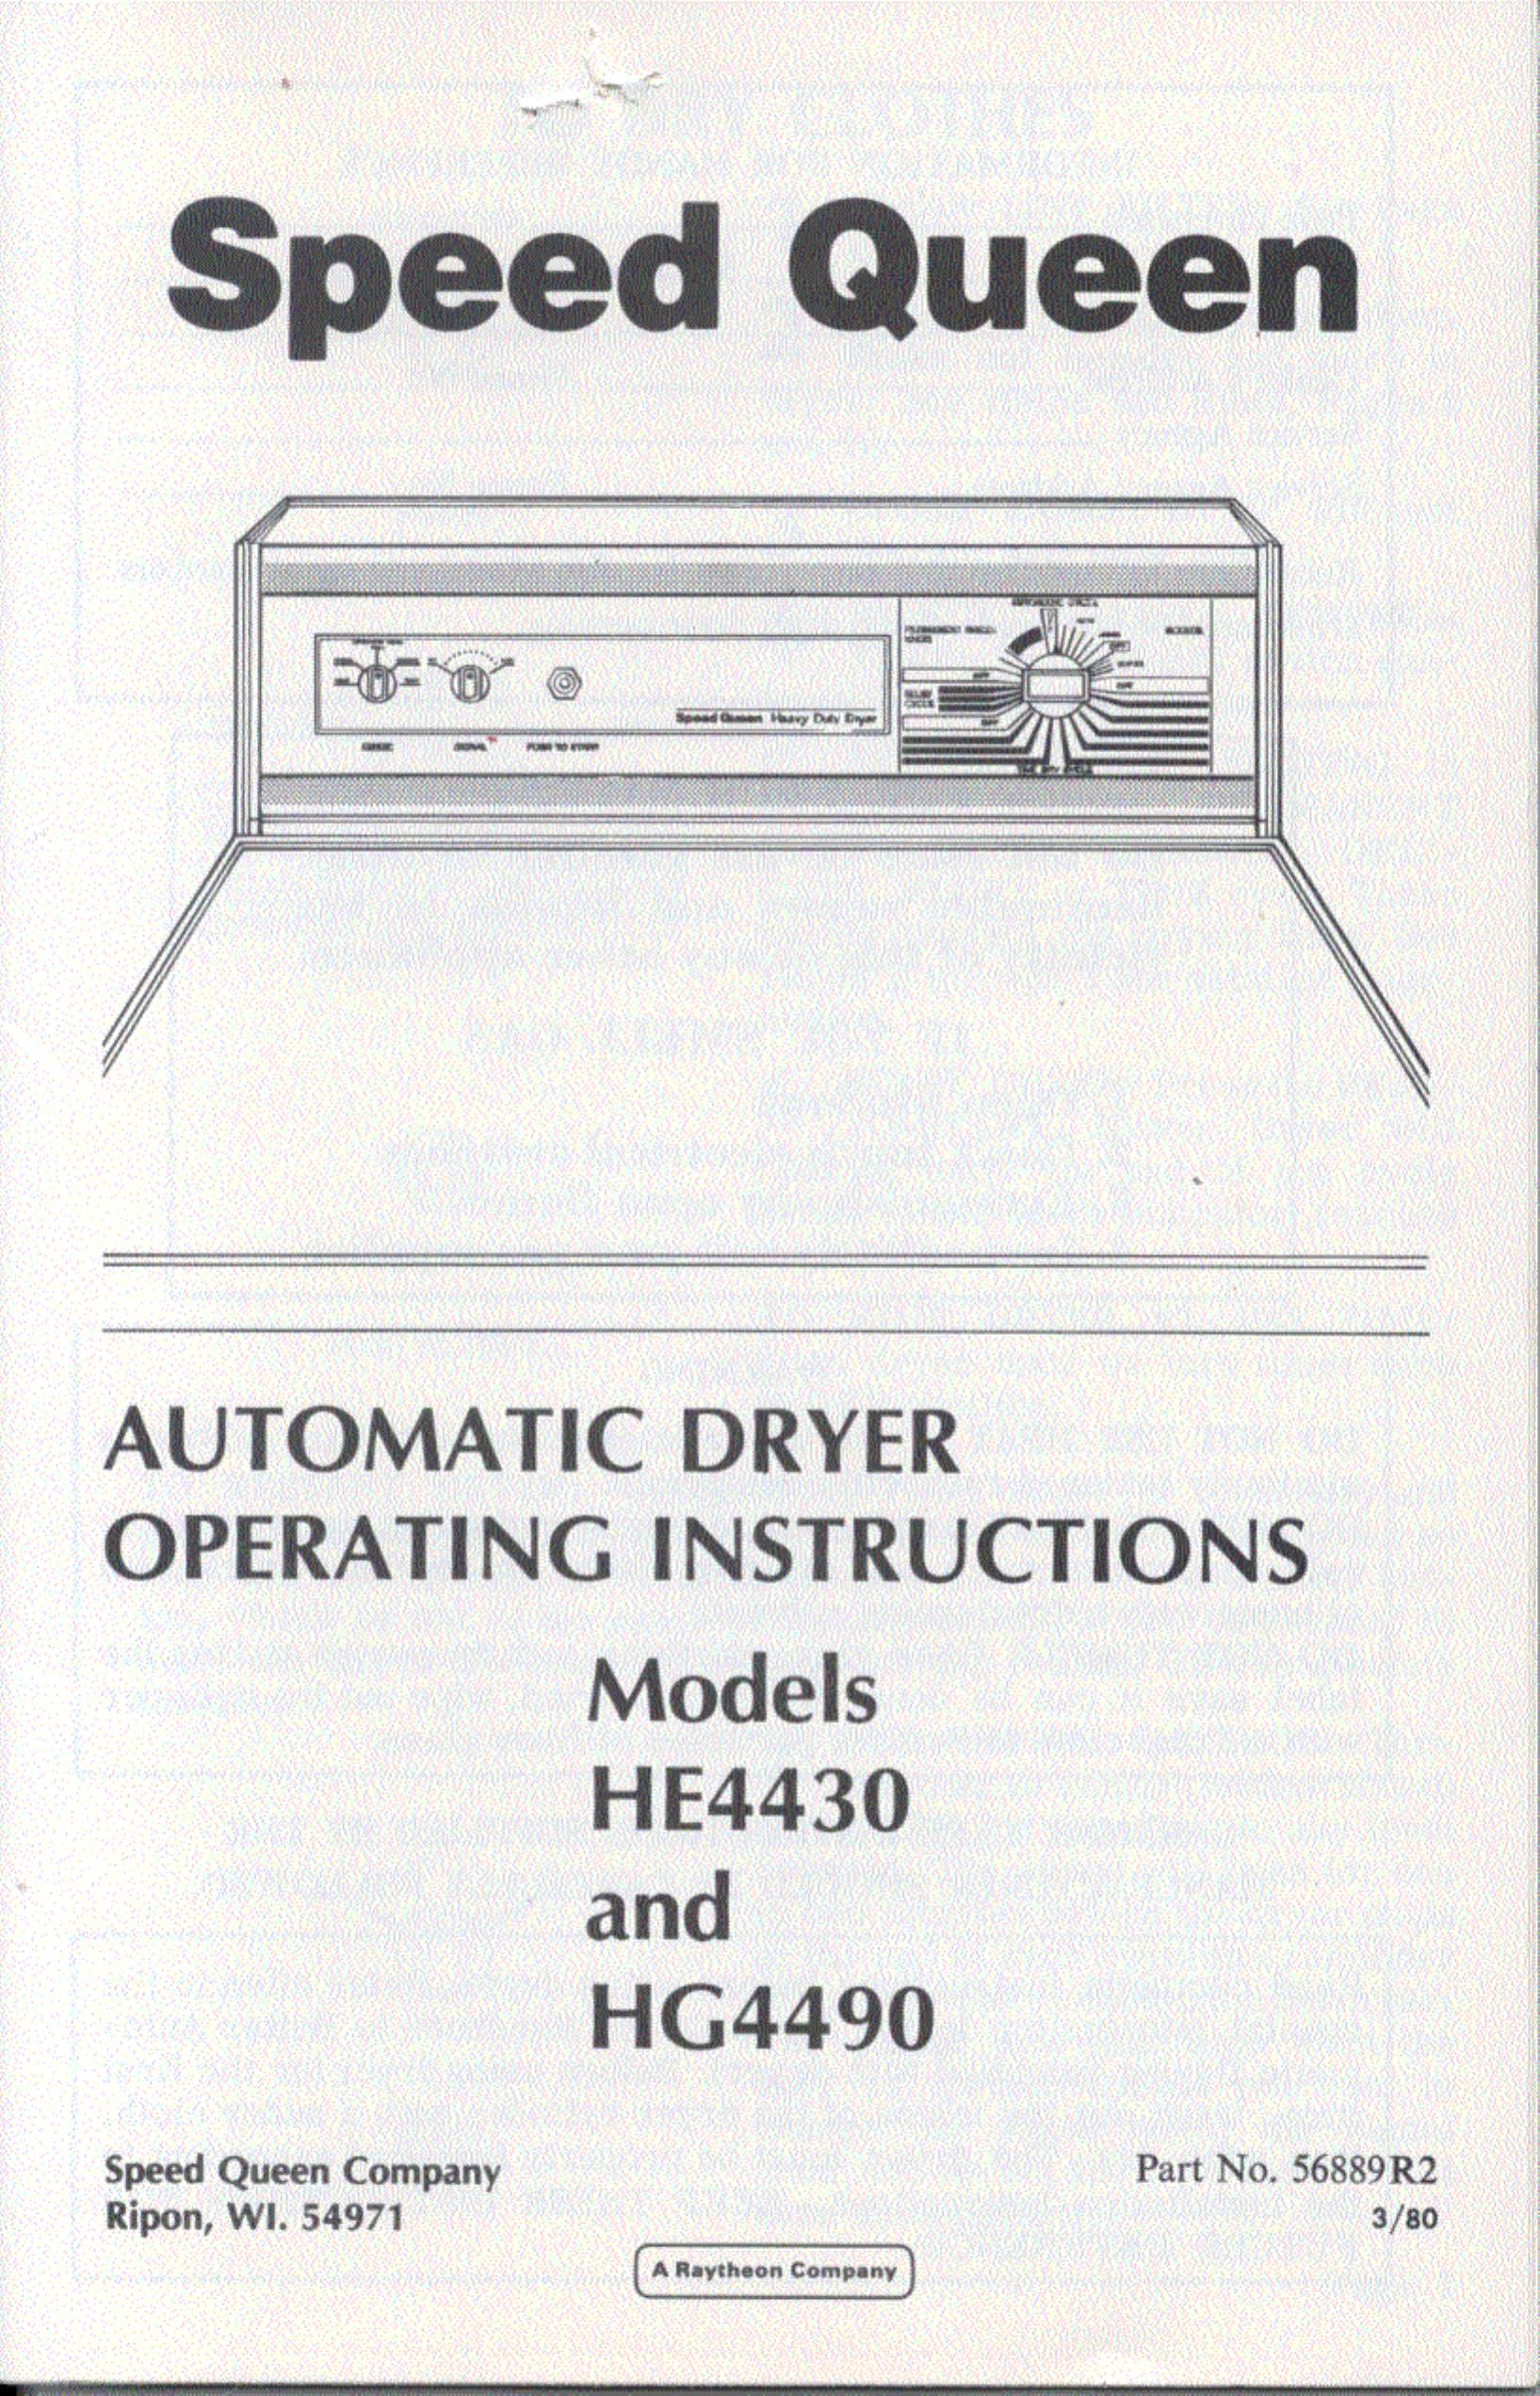 Speed Queen HG4490 Clothes Dryer User Manual